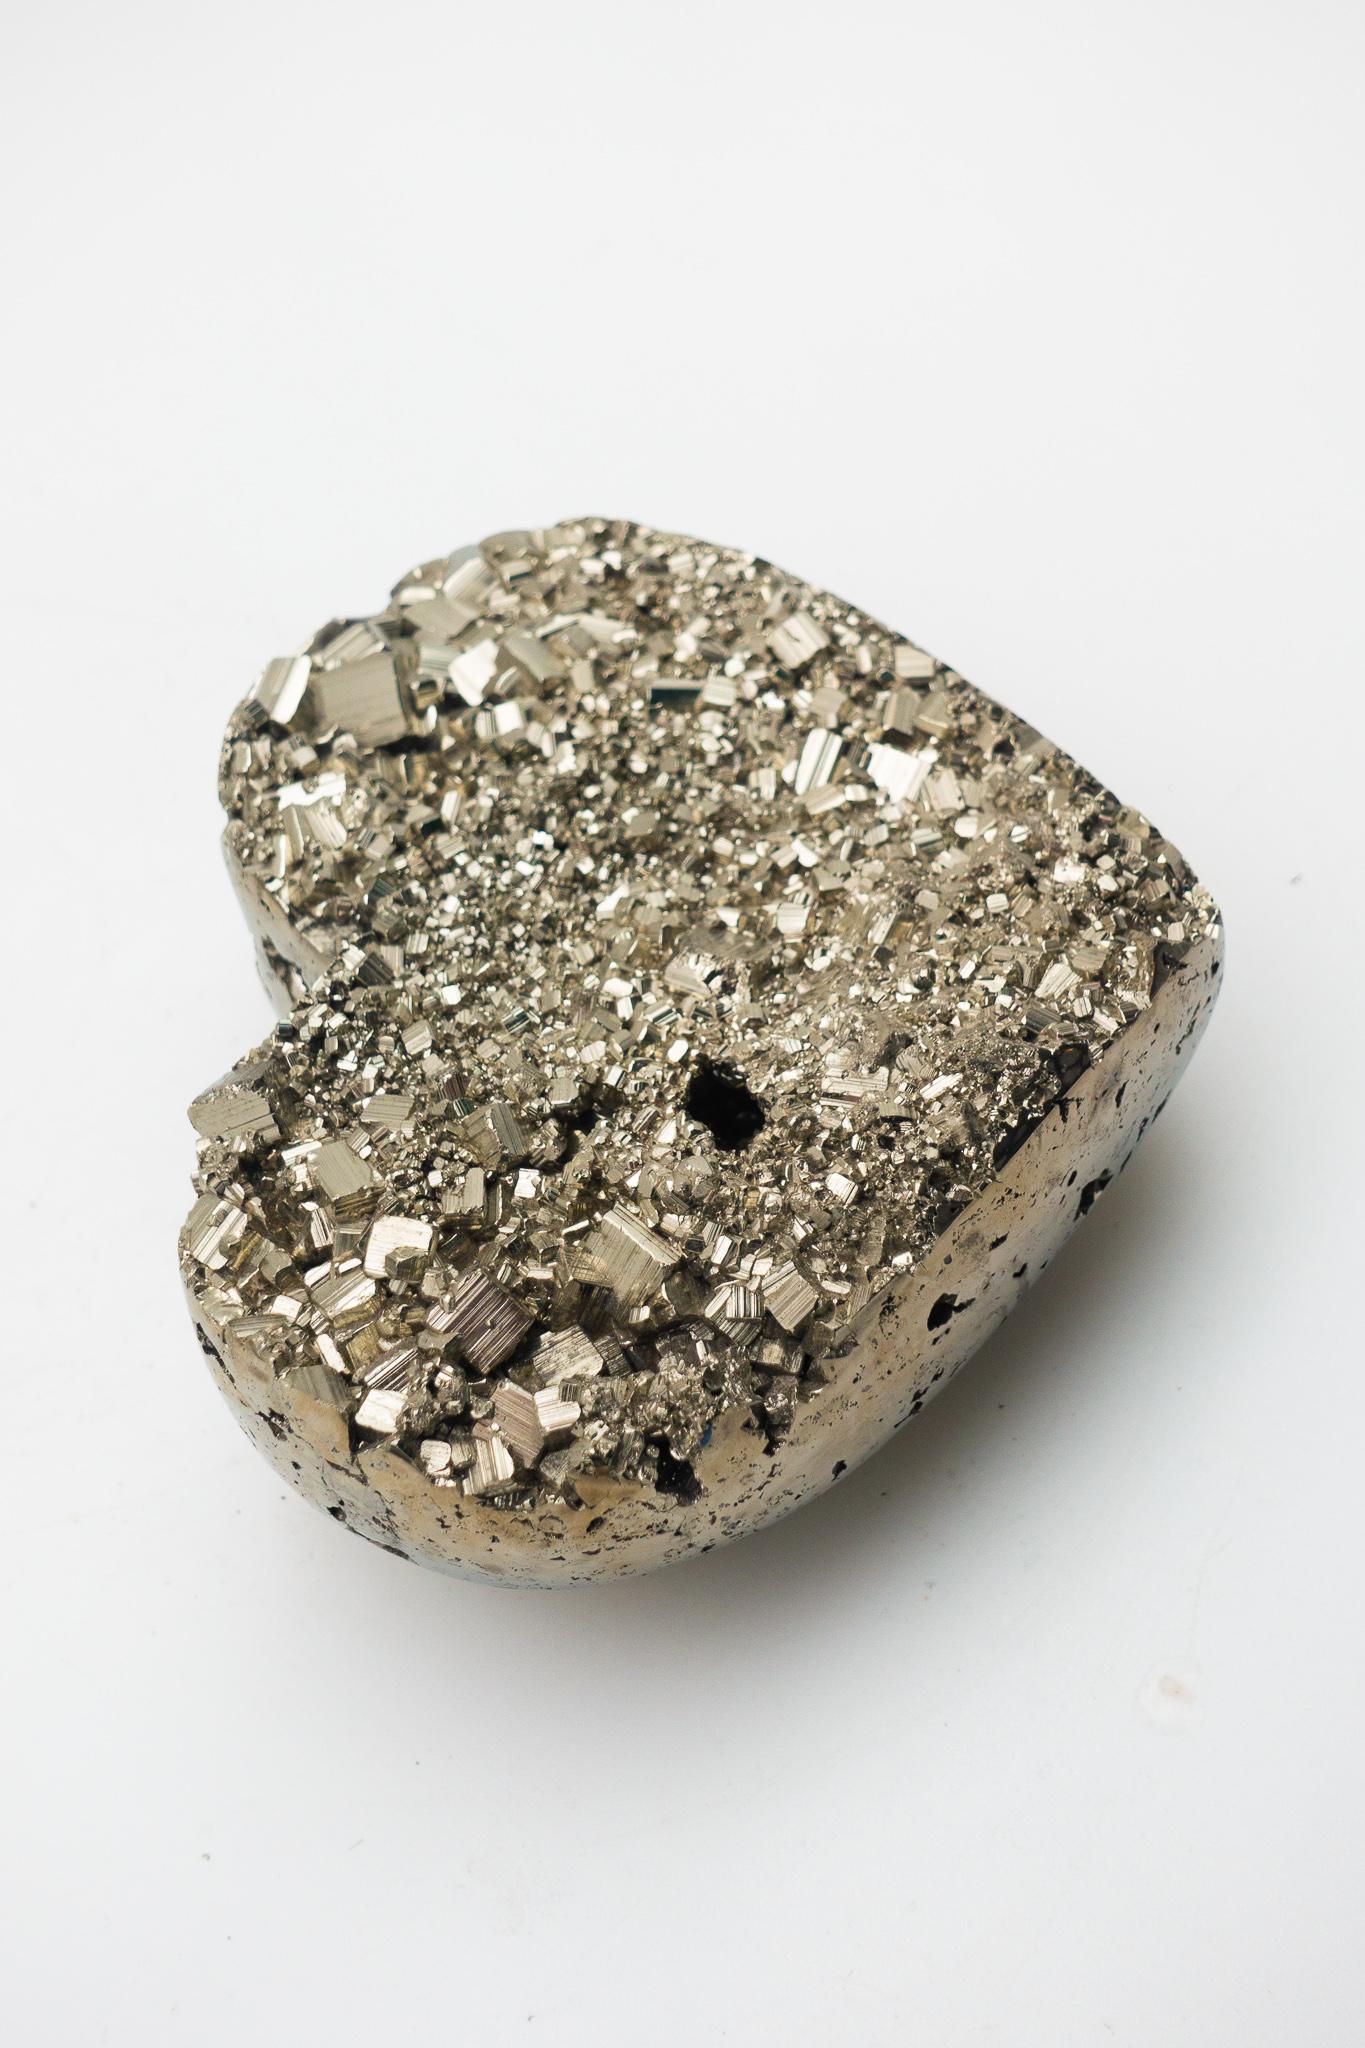 Beautifully carved pyrite specimen from Peru. Pyrite is a symbol of prosperity and good luck. The ideal gift for Valentines Day - love, prosperity and good luck!